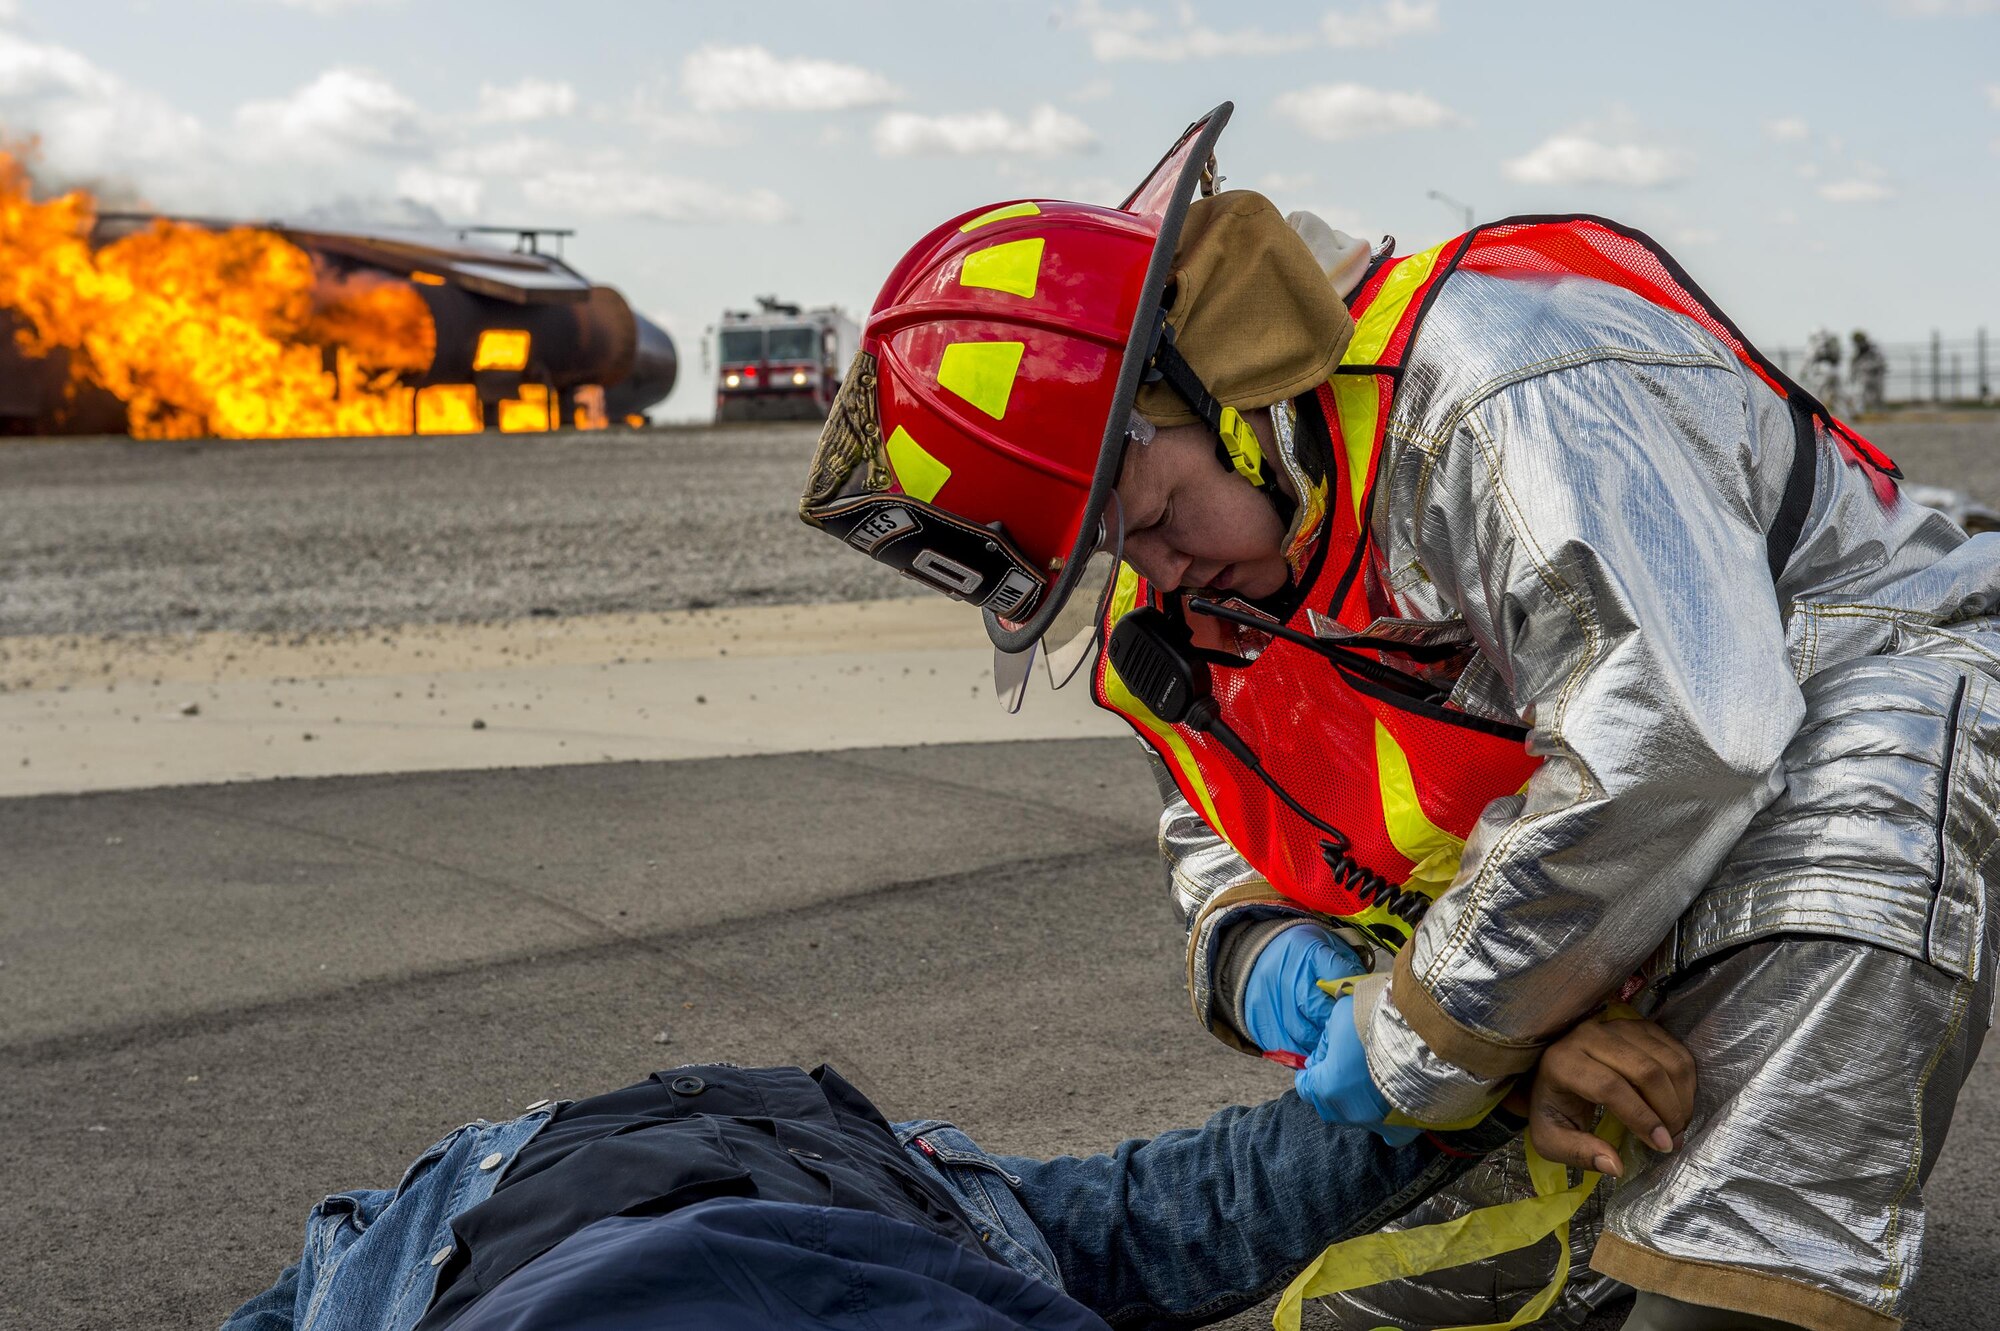 John West, a firefighter with the 910th Civil Engineer Squadron fire department here, places a yellow band around a simulated victim’s arm during a multi-agency anti-hijacking exercise held here, April 24, 2015. The yellow band helps emergency response personnel prioritize victims for treatment based on injury severity. In the background, other 910th firefighters fight a blaze on a training aircraft simulating a commercial aircraft after terrorists detonate an explosive device. Participating agencies included the Western Reserve Port Authority, Youngstown-Warren Regional Airport, local law enforcement and fire departments, the Federal Bureau of Investigation, the Federal Aviation Administration and the Air Force Reserve. (U.S. Air Force photo/Eric M. White)